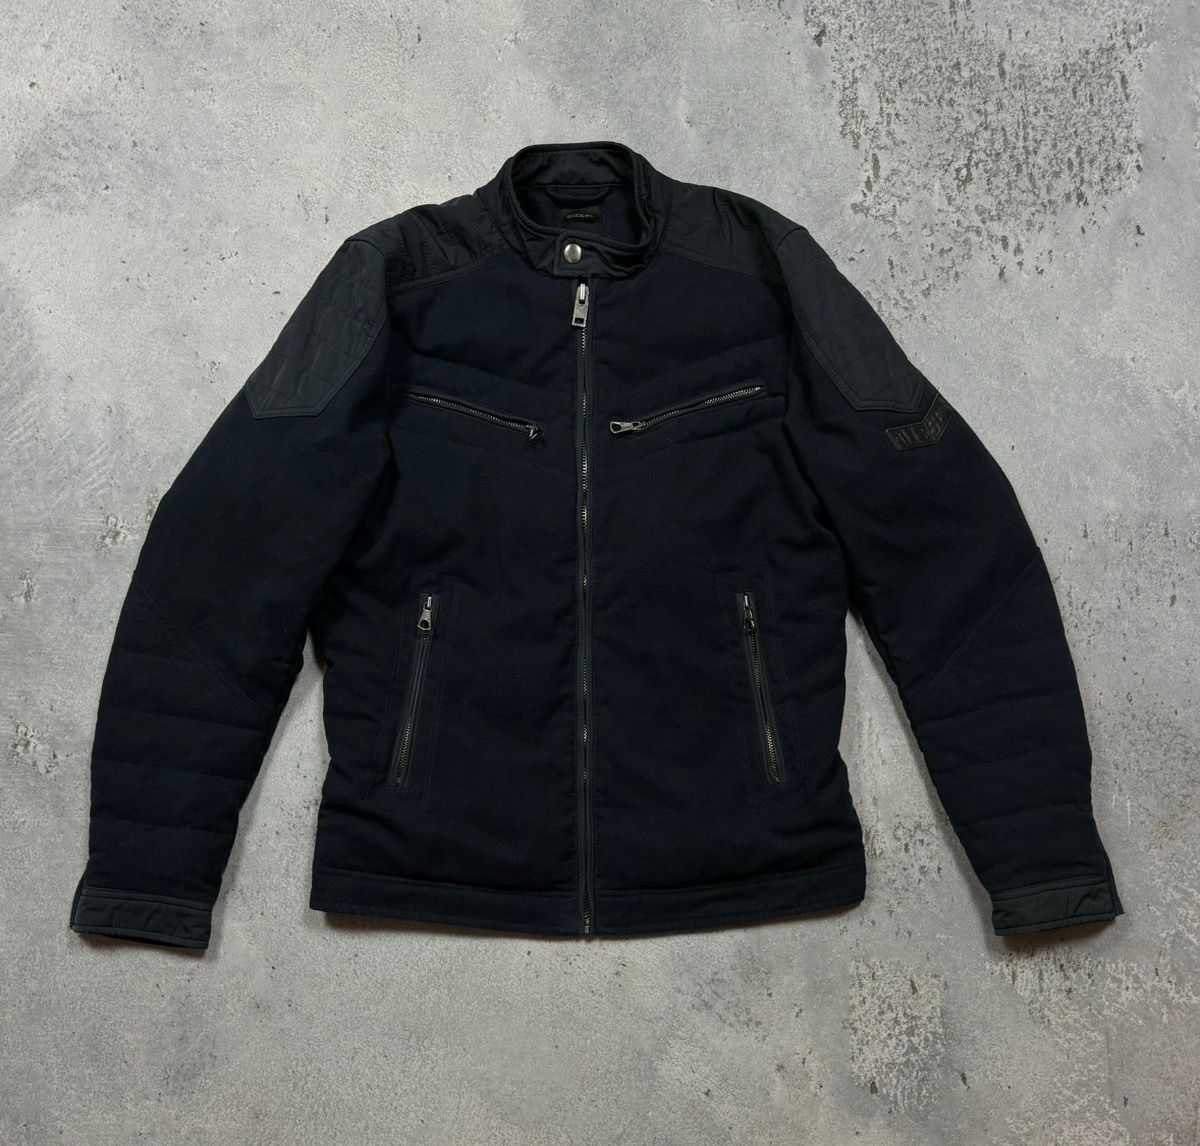 Diesel Jacket Bomber Zip Up in Null, Men's (Size Large) Product Image